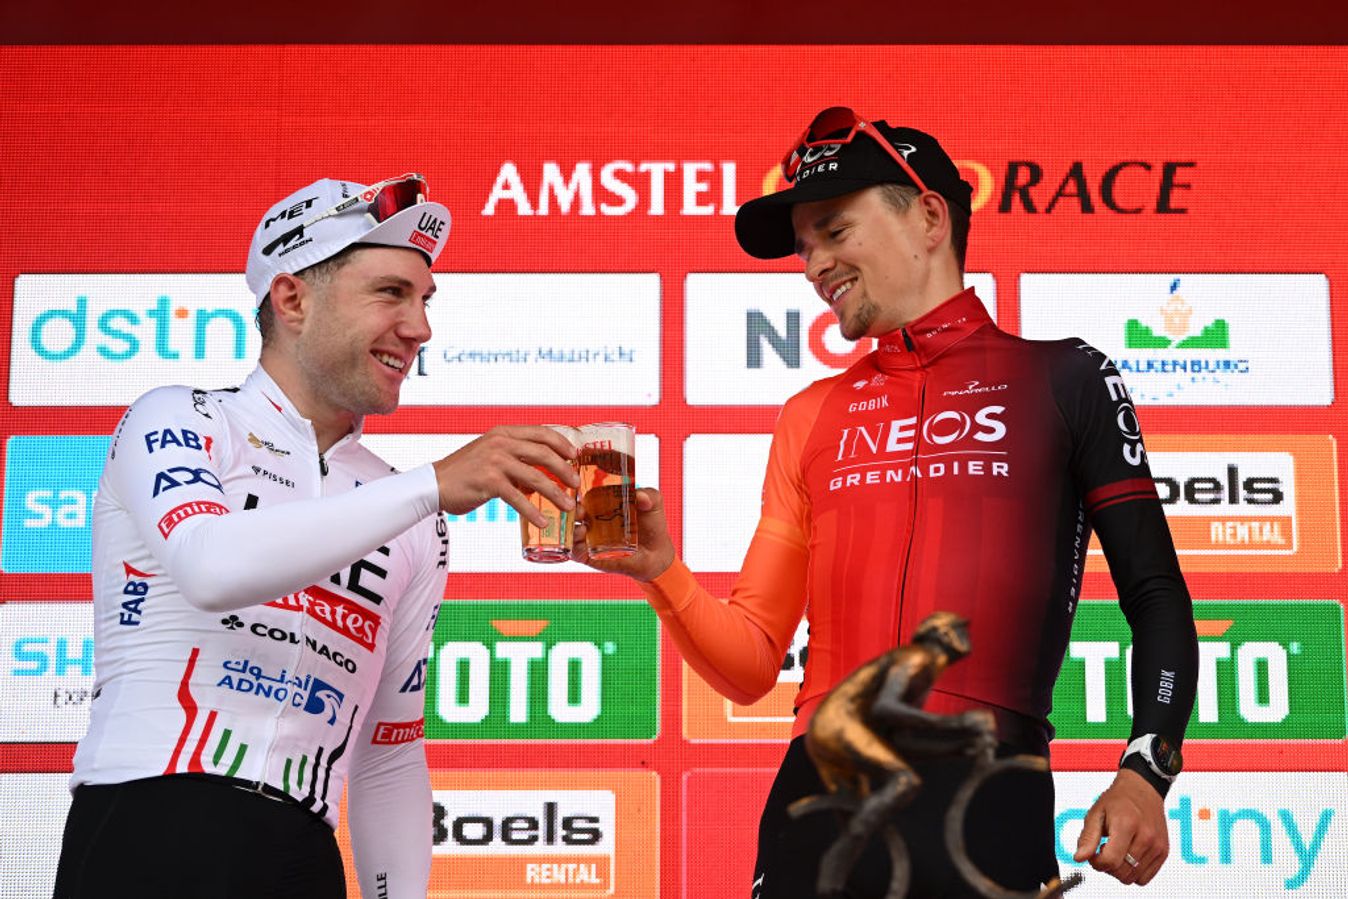 Marc Hirschi (left) shares an Amstel beer with Tom Pidcock on the podium of the Amstel Gold Race